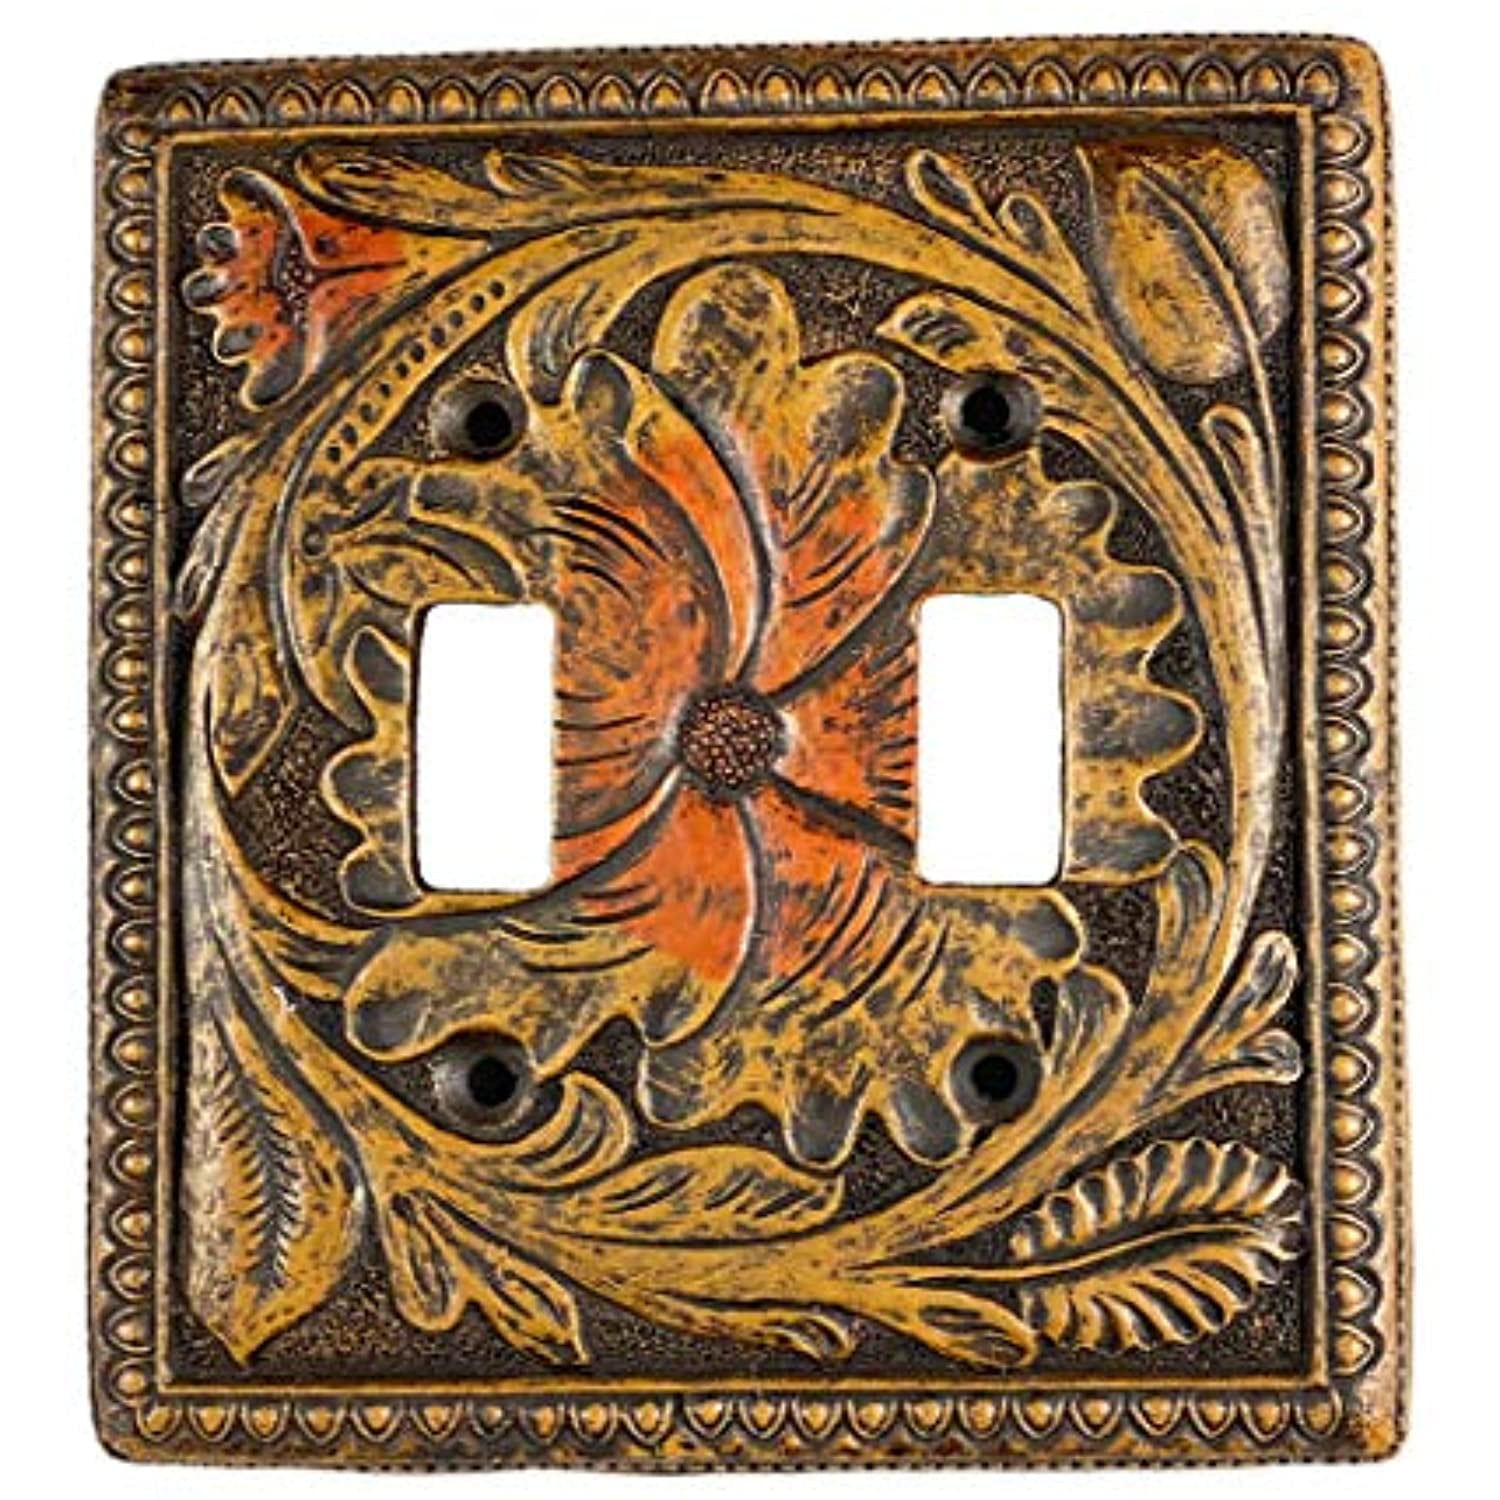 Antique Sponged Copper Scroll 2 Gang Double Toggle Light Switch Wallplate Cover 